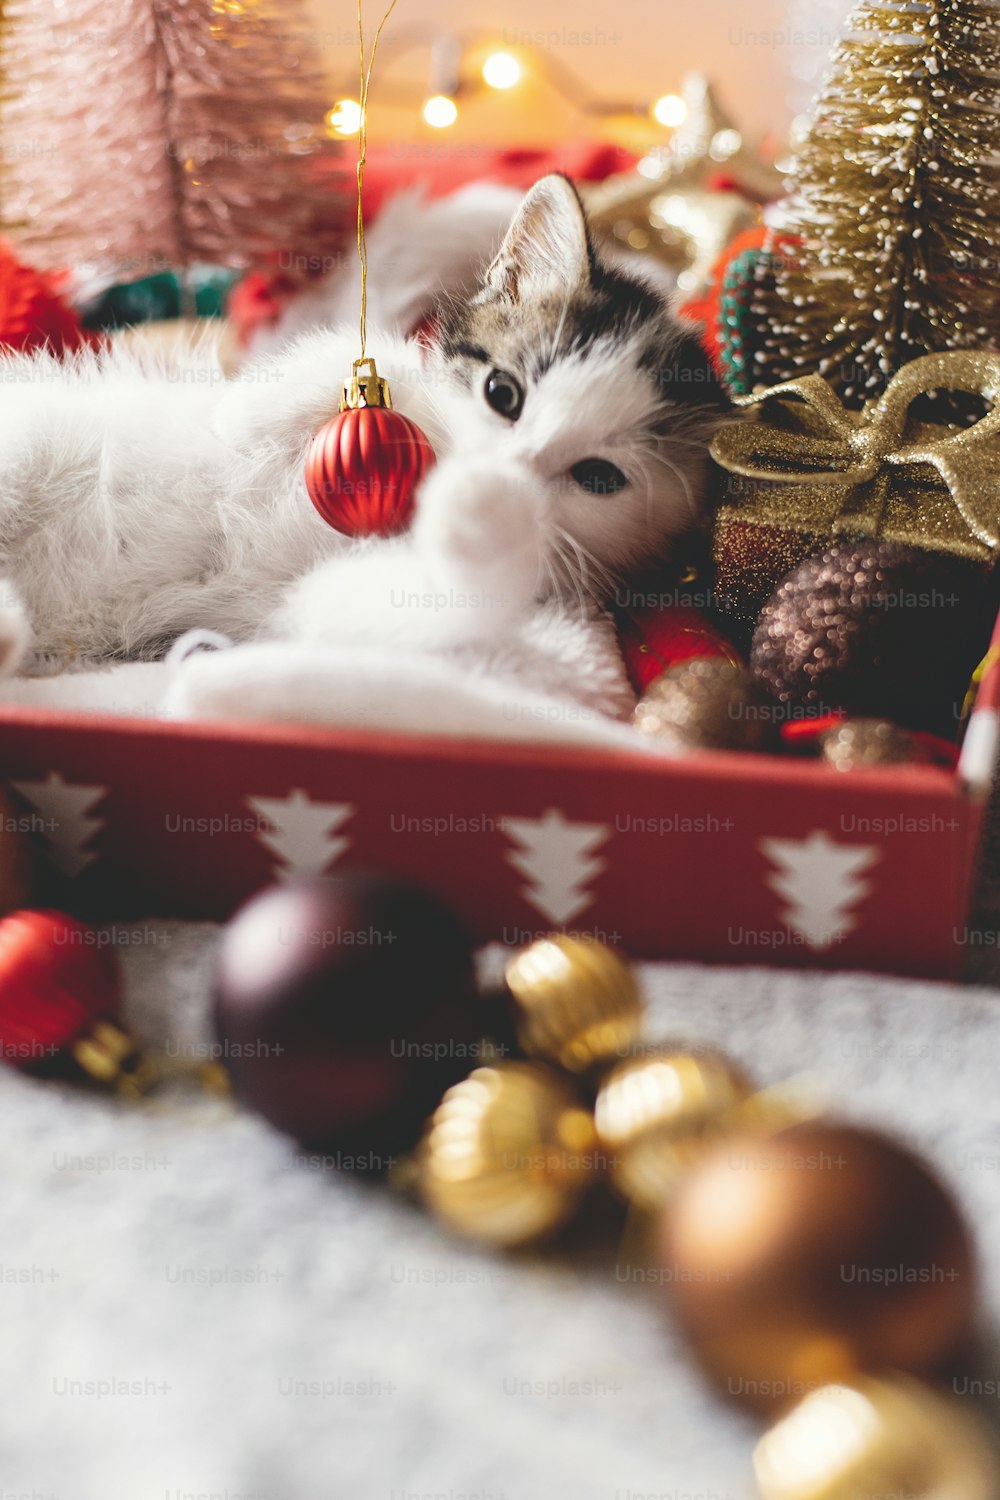 Cute kitten playing with christmas red bauble, lying in box with santa hat on background of christmas tree and ornaments in warm illumination lights. Merry Christmas and Happy Holidays!